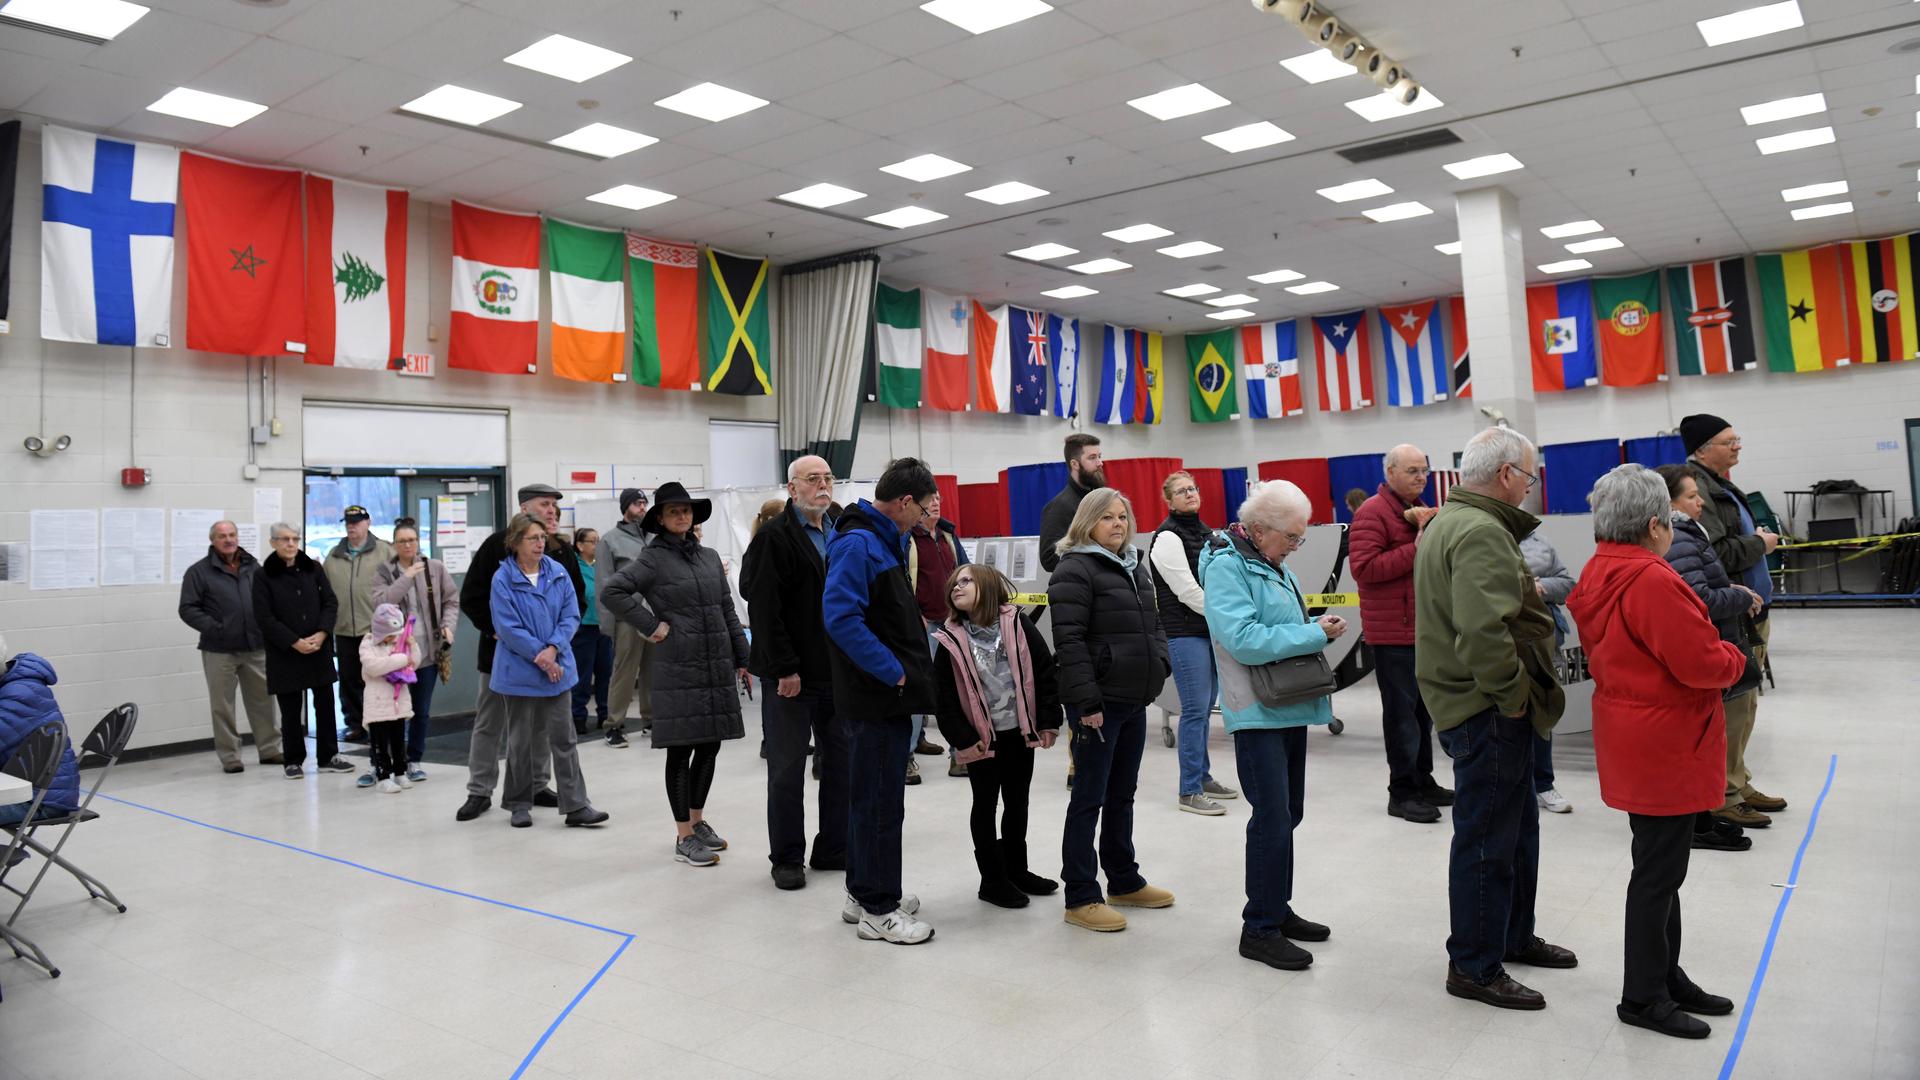 Voters wait in line to cast their votes at the Bicentennial Elementary School in New Hampshire's first-in-the-nation US presidential primary election in Nashua, New Hampshire, Feb. 11, 2020. 